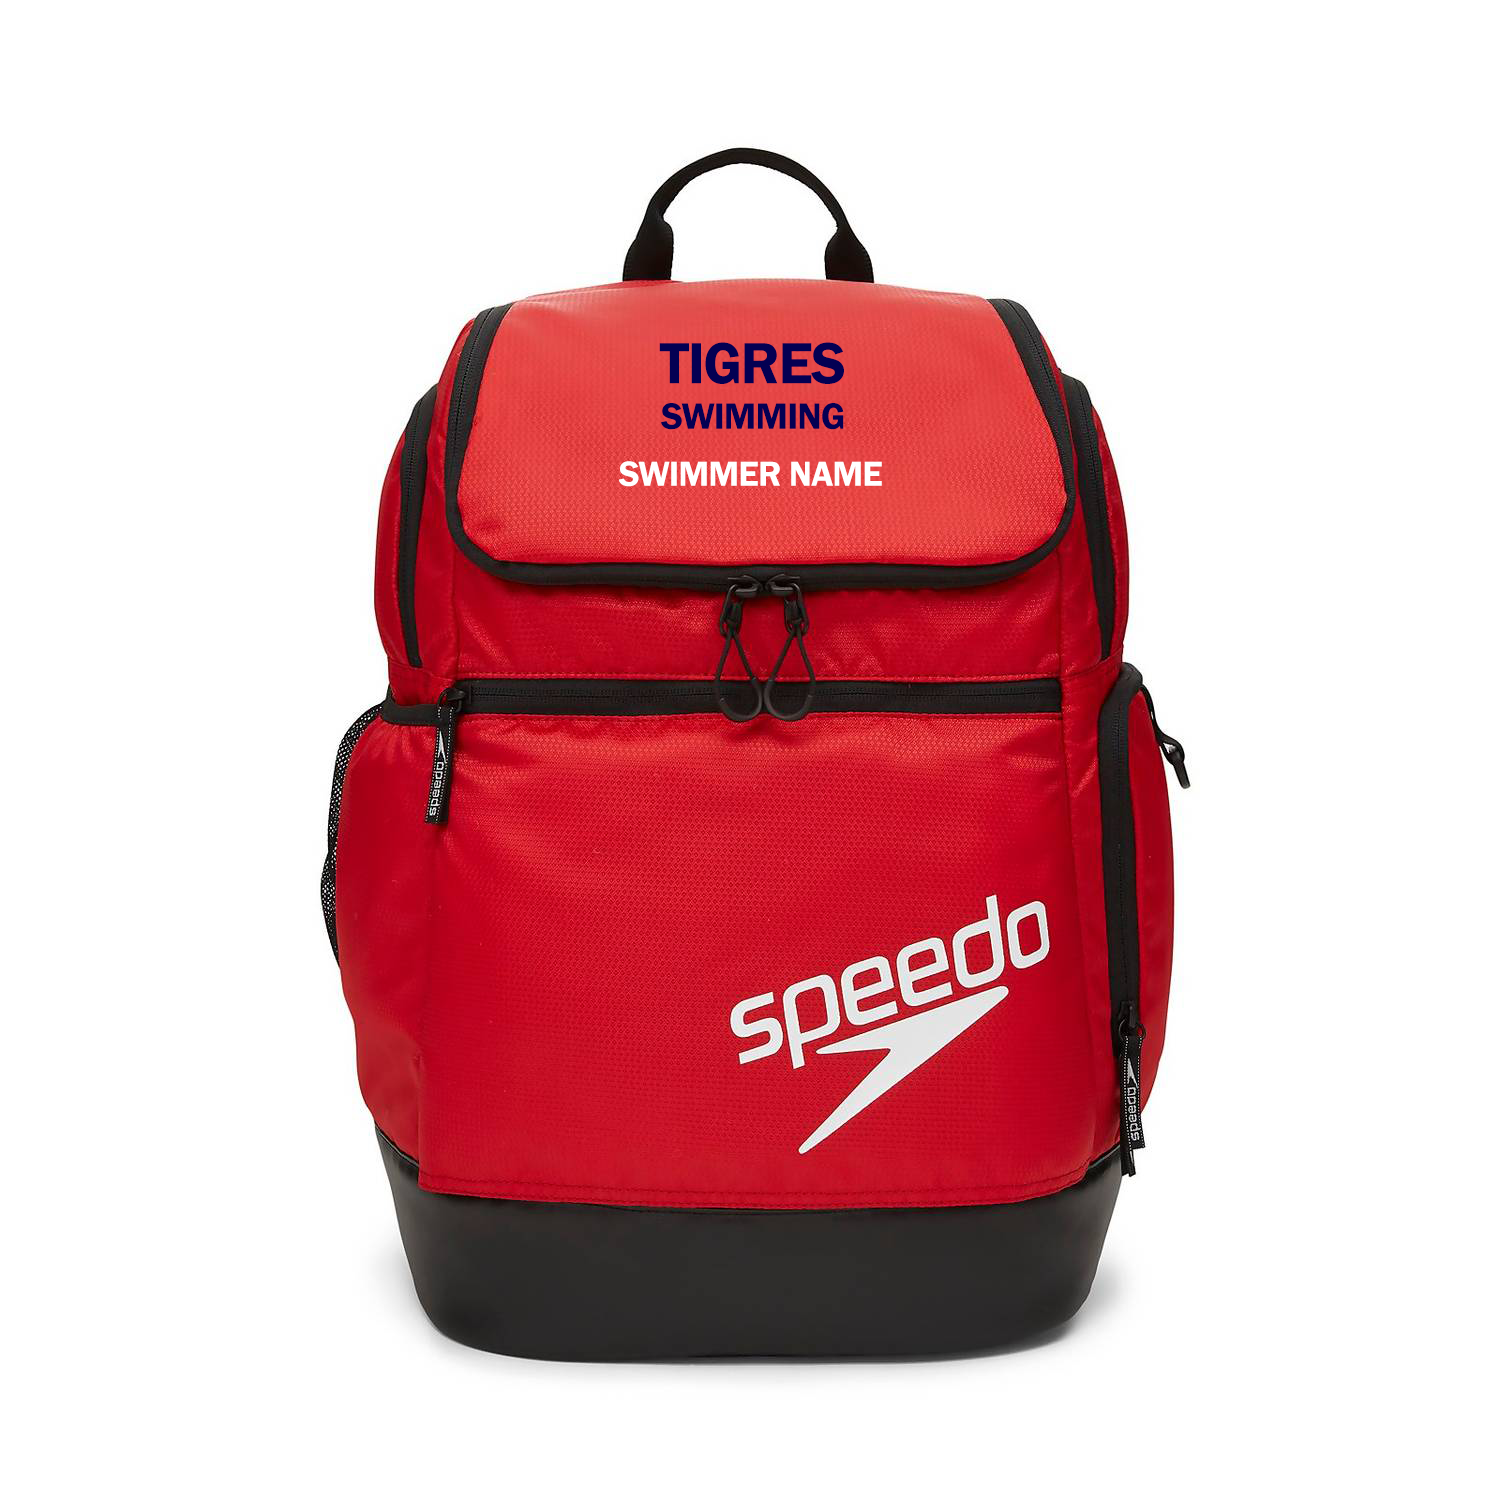 Dallas International School Team Backpack W/ Embroidered Logo & Name